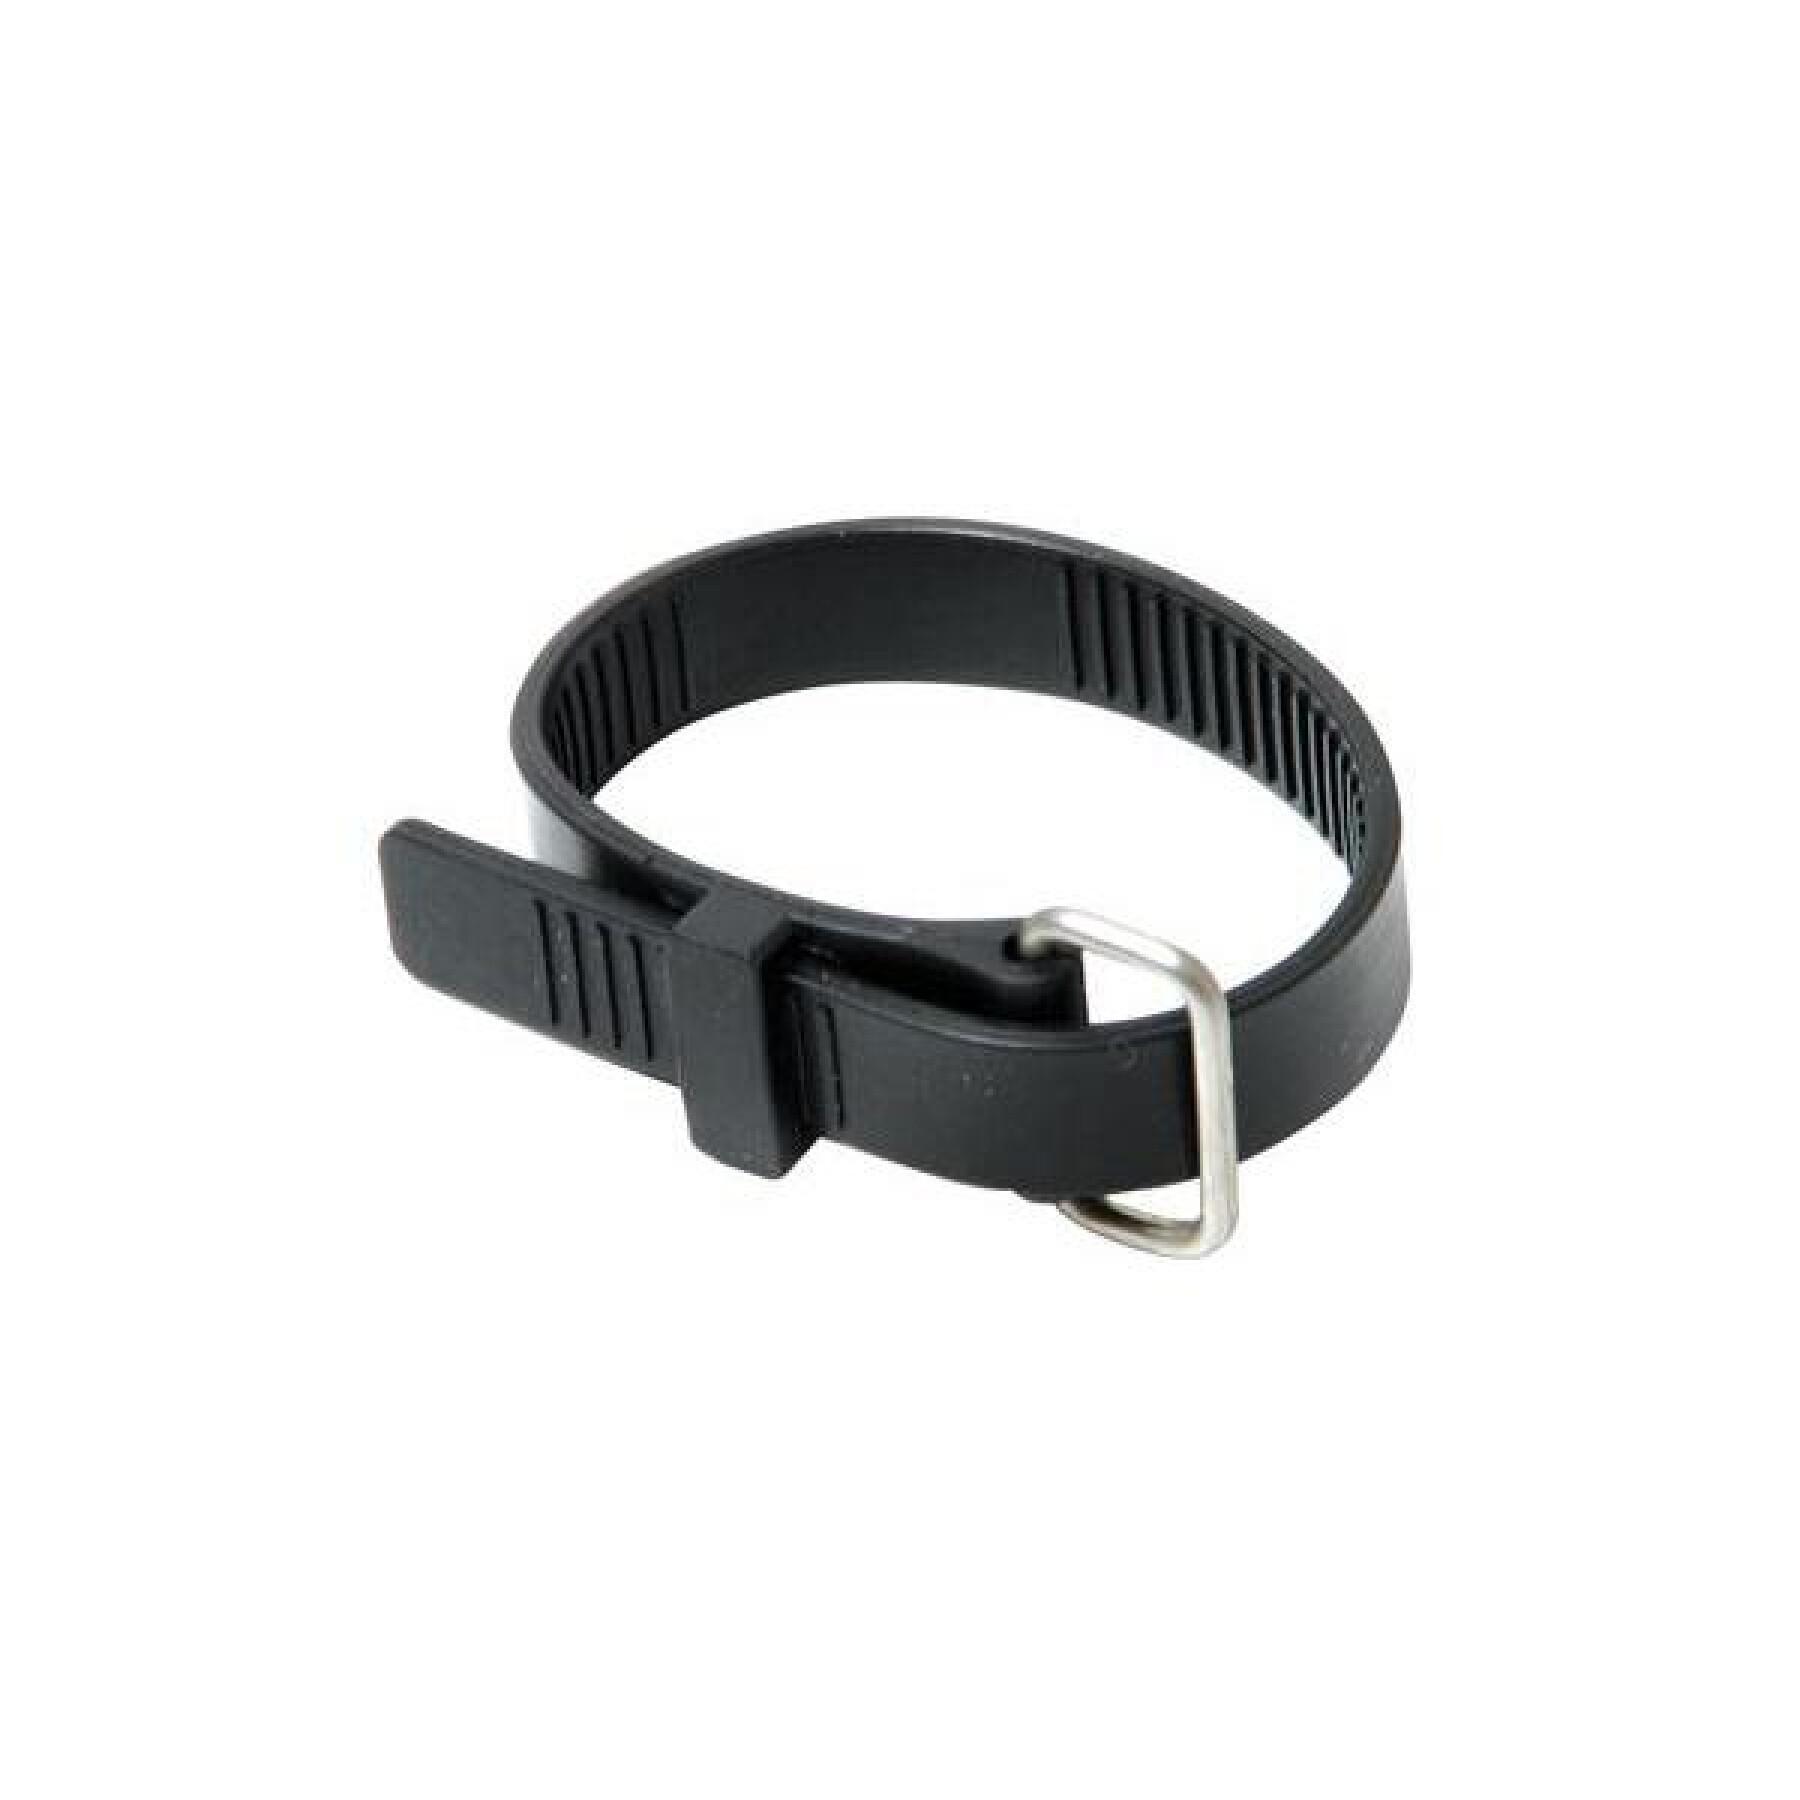 Replacement watch strap for fire watches Massi